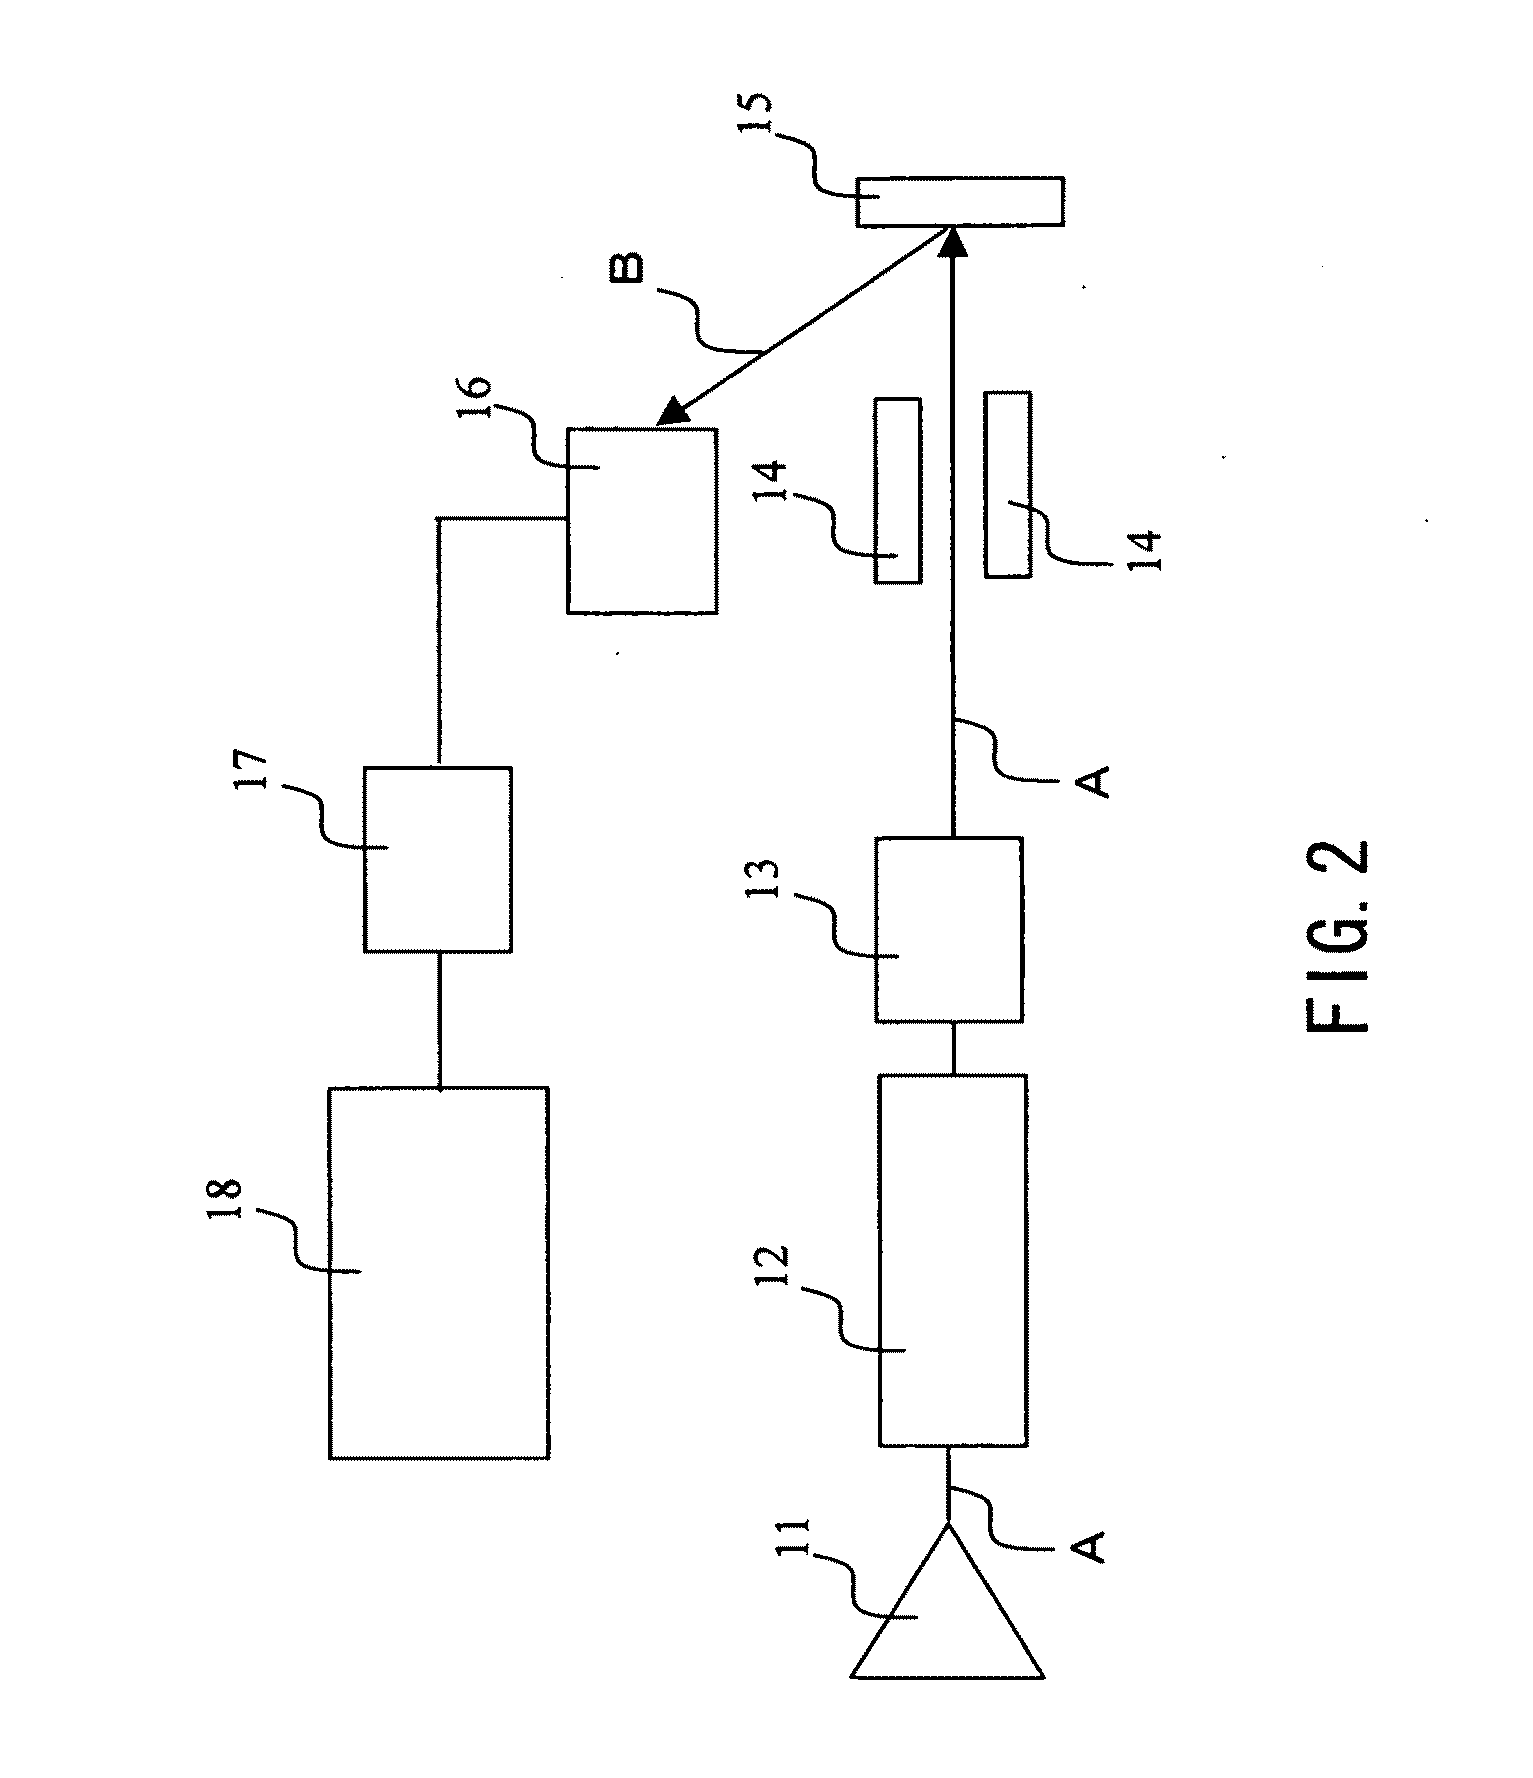 Second ion mass spectrometry method and imaging method